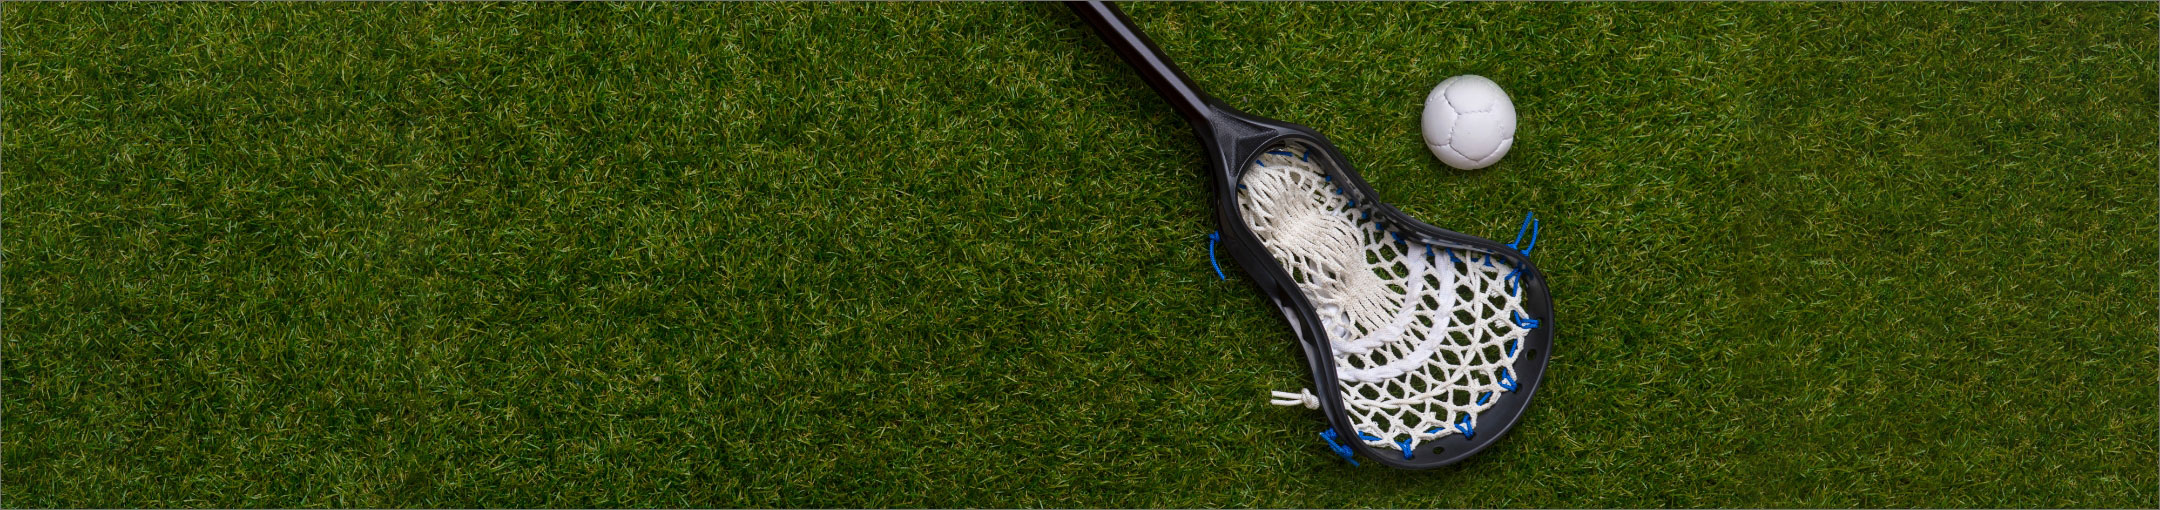 a lacrosse stick and ball on a field